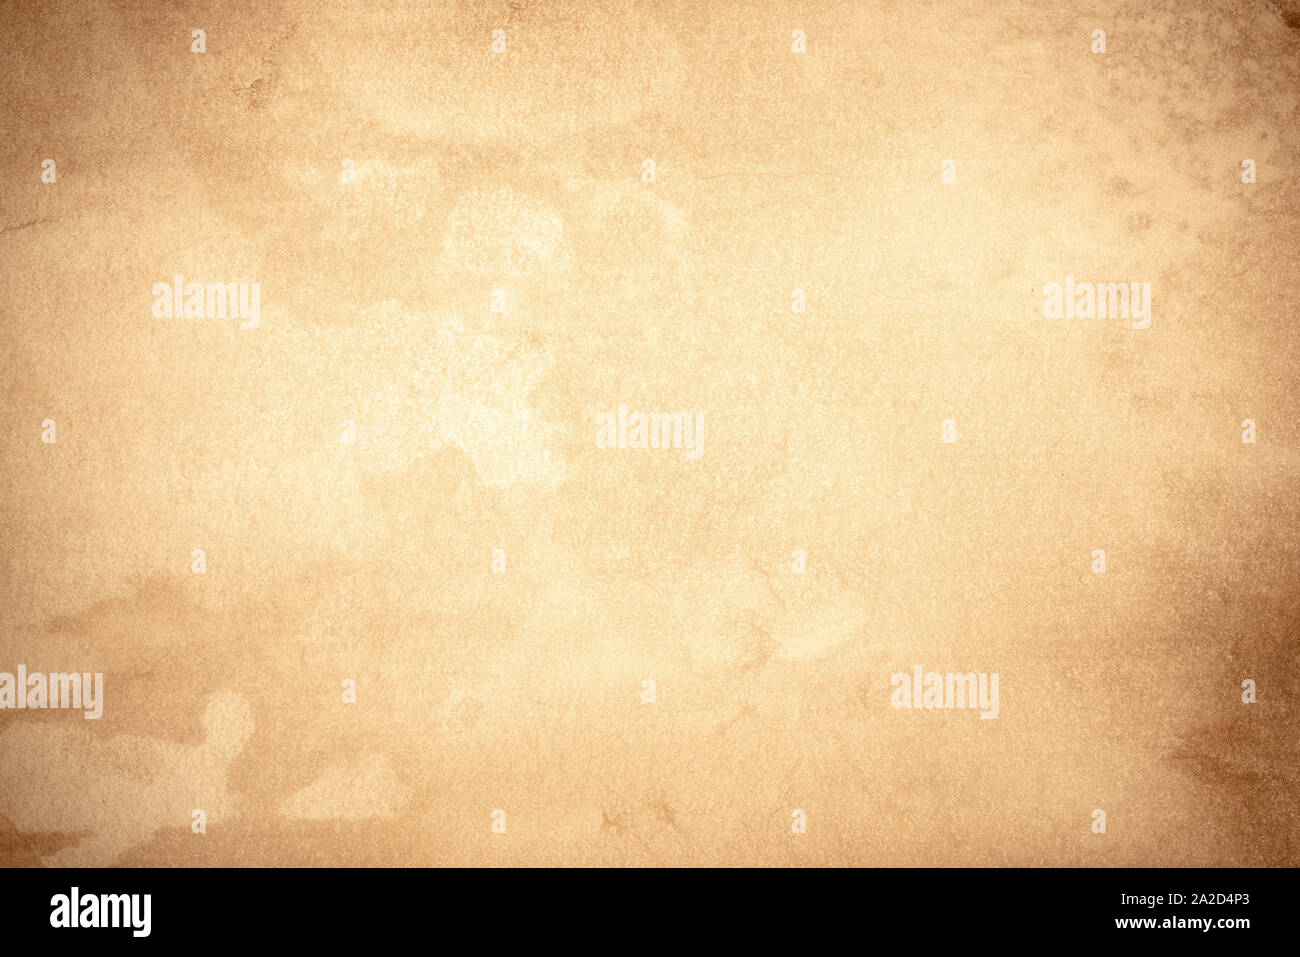 Old dirty sheet of paper as background or texture Stock Photo